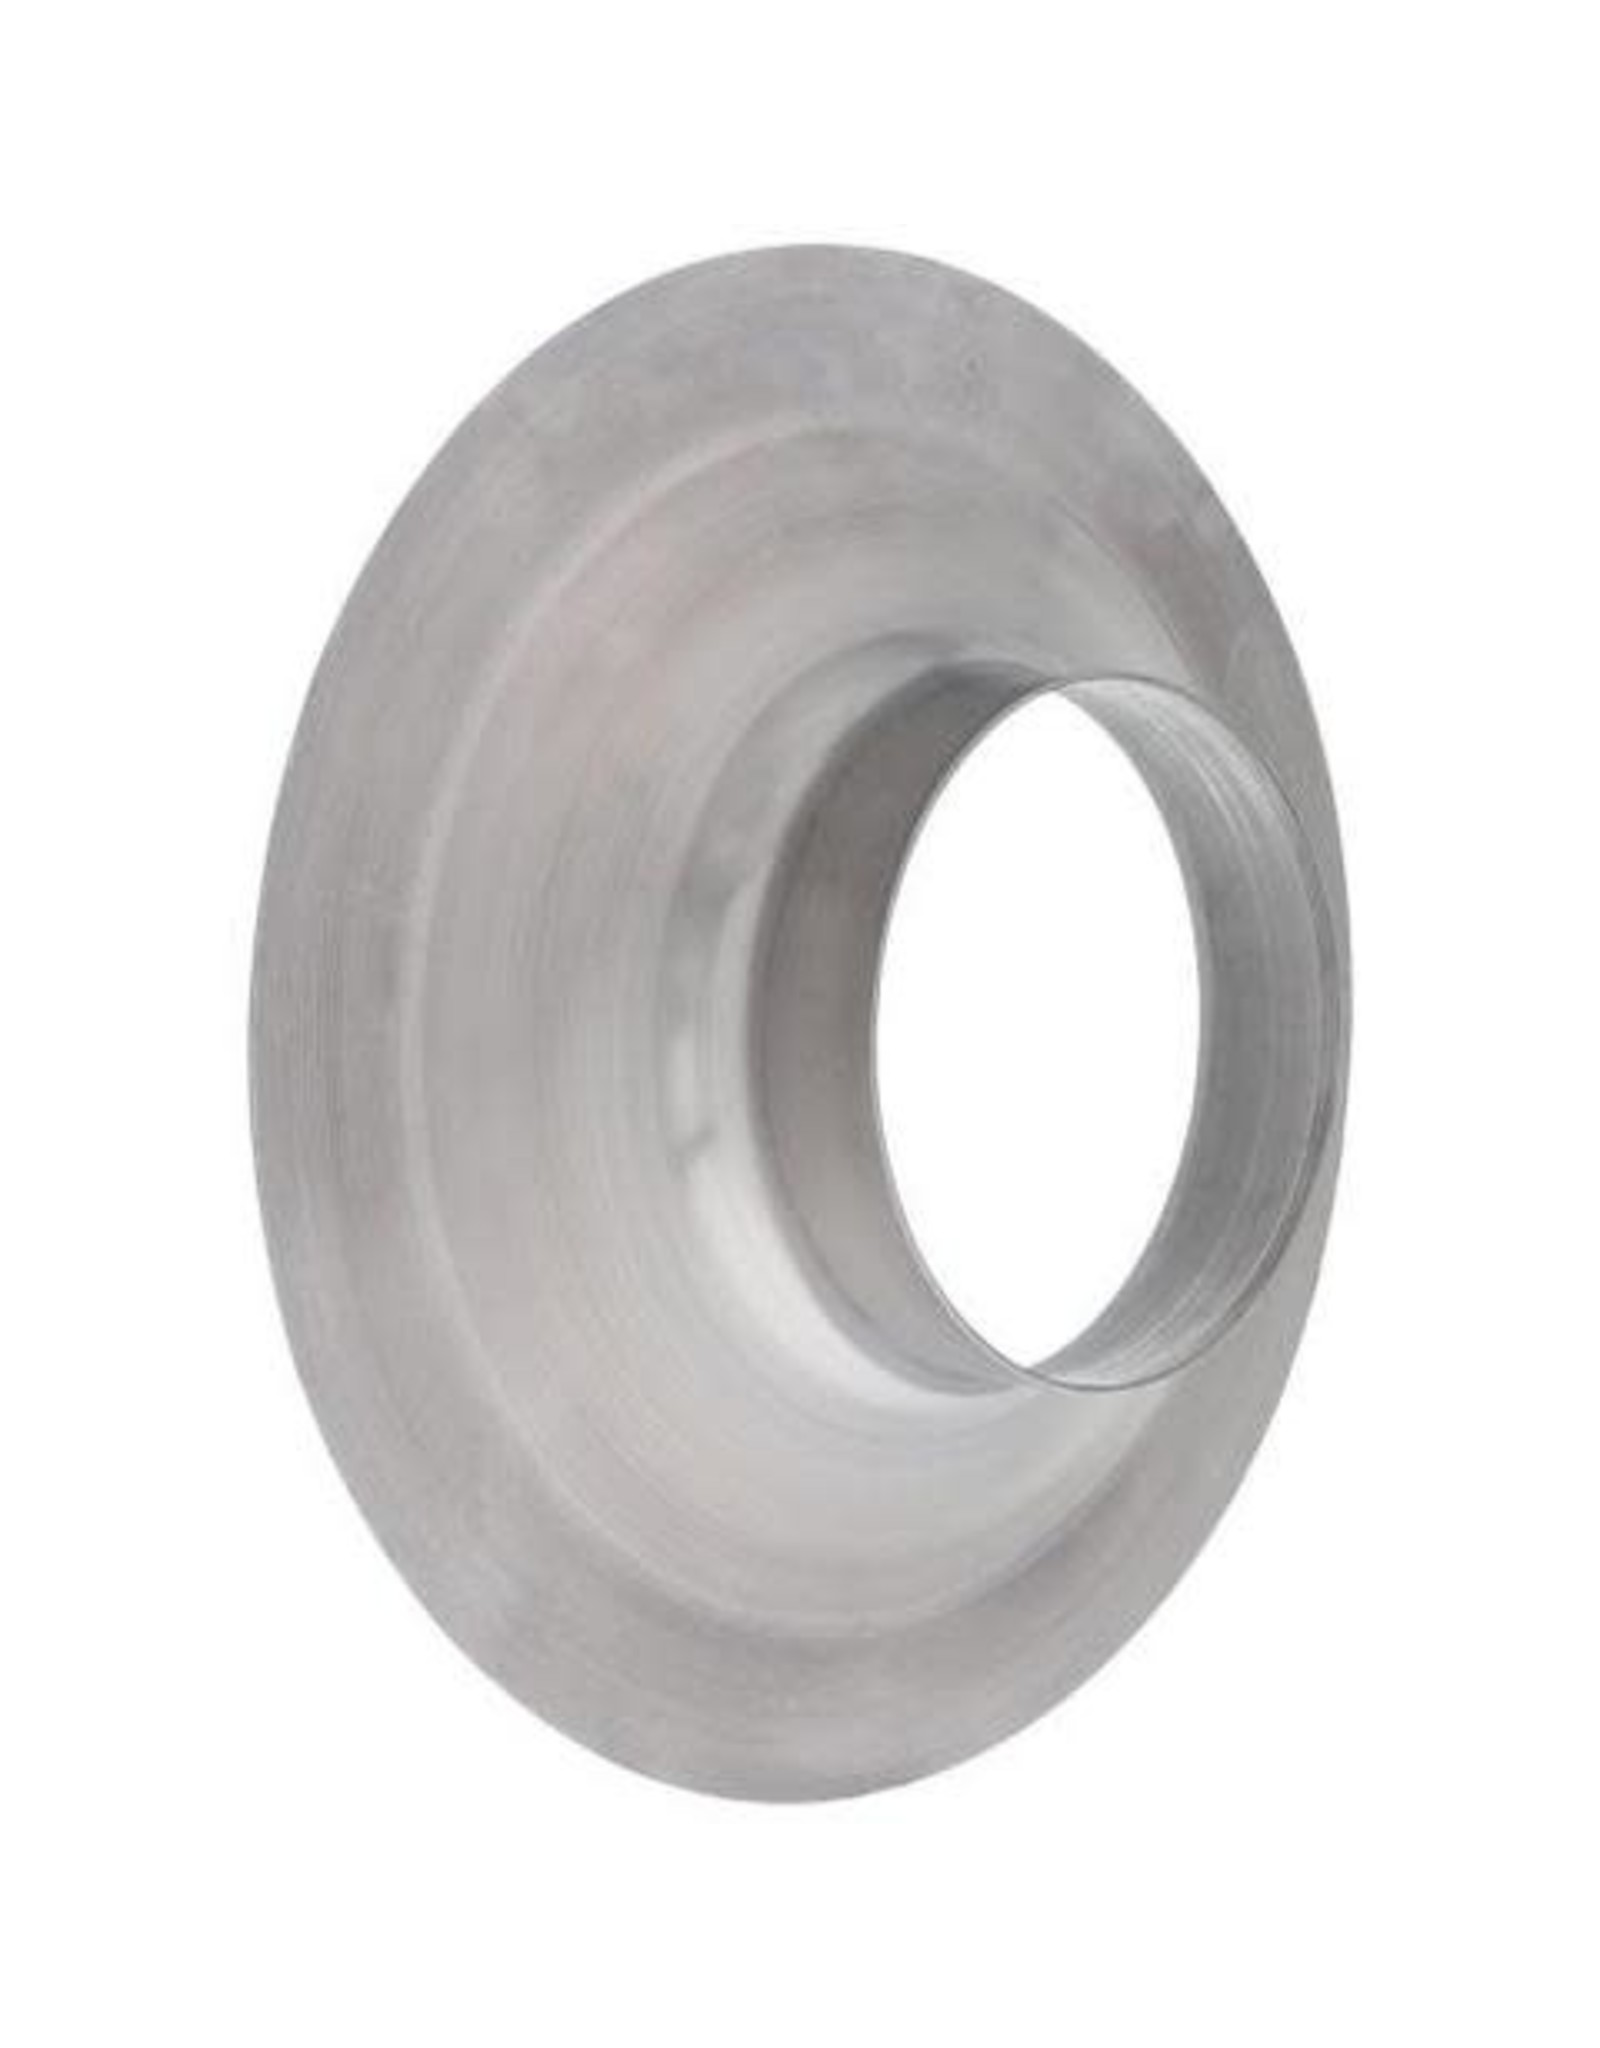 6" Inch Can Flange for Can Filter 50/66/75 Ducting Ventilation Flange SALE 